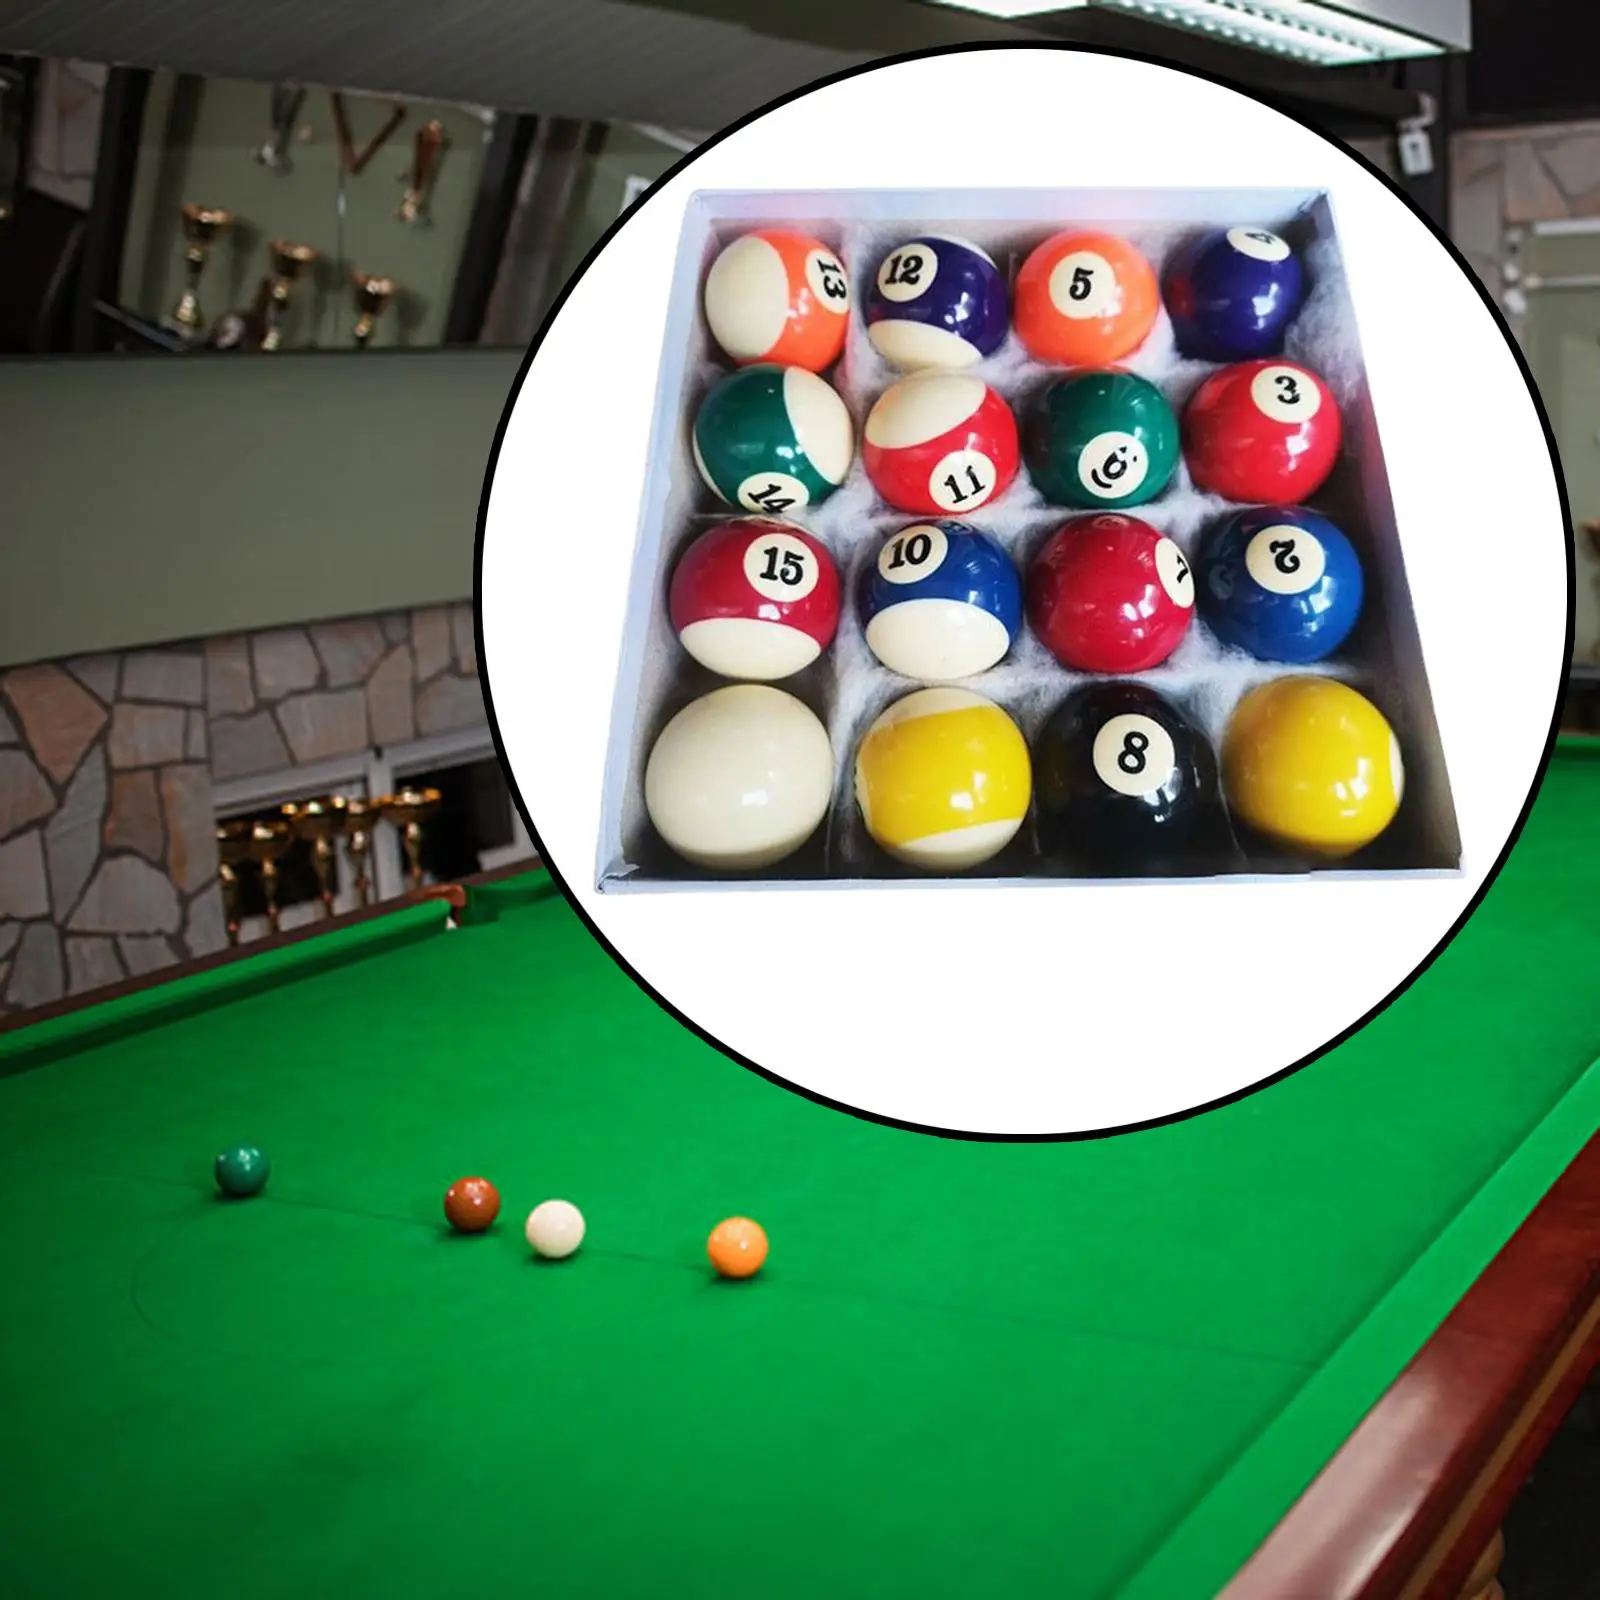 16x Billiard Balls Pool Balls Complete 16 Balls for Pool Tables for Exercise